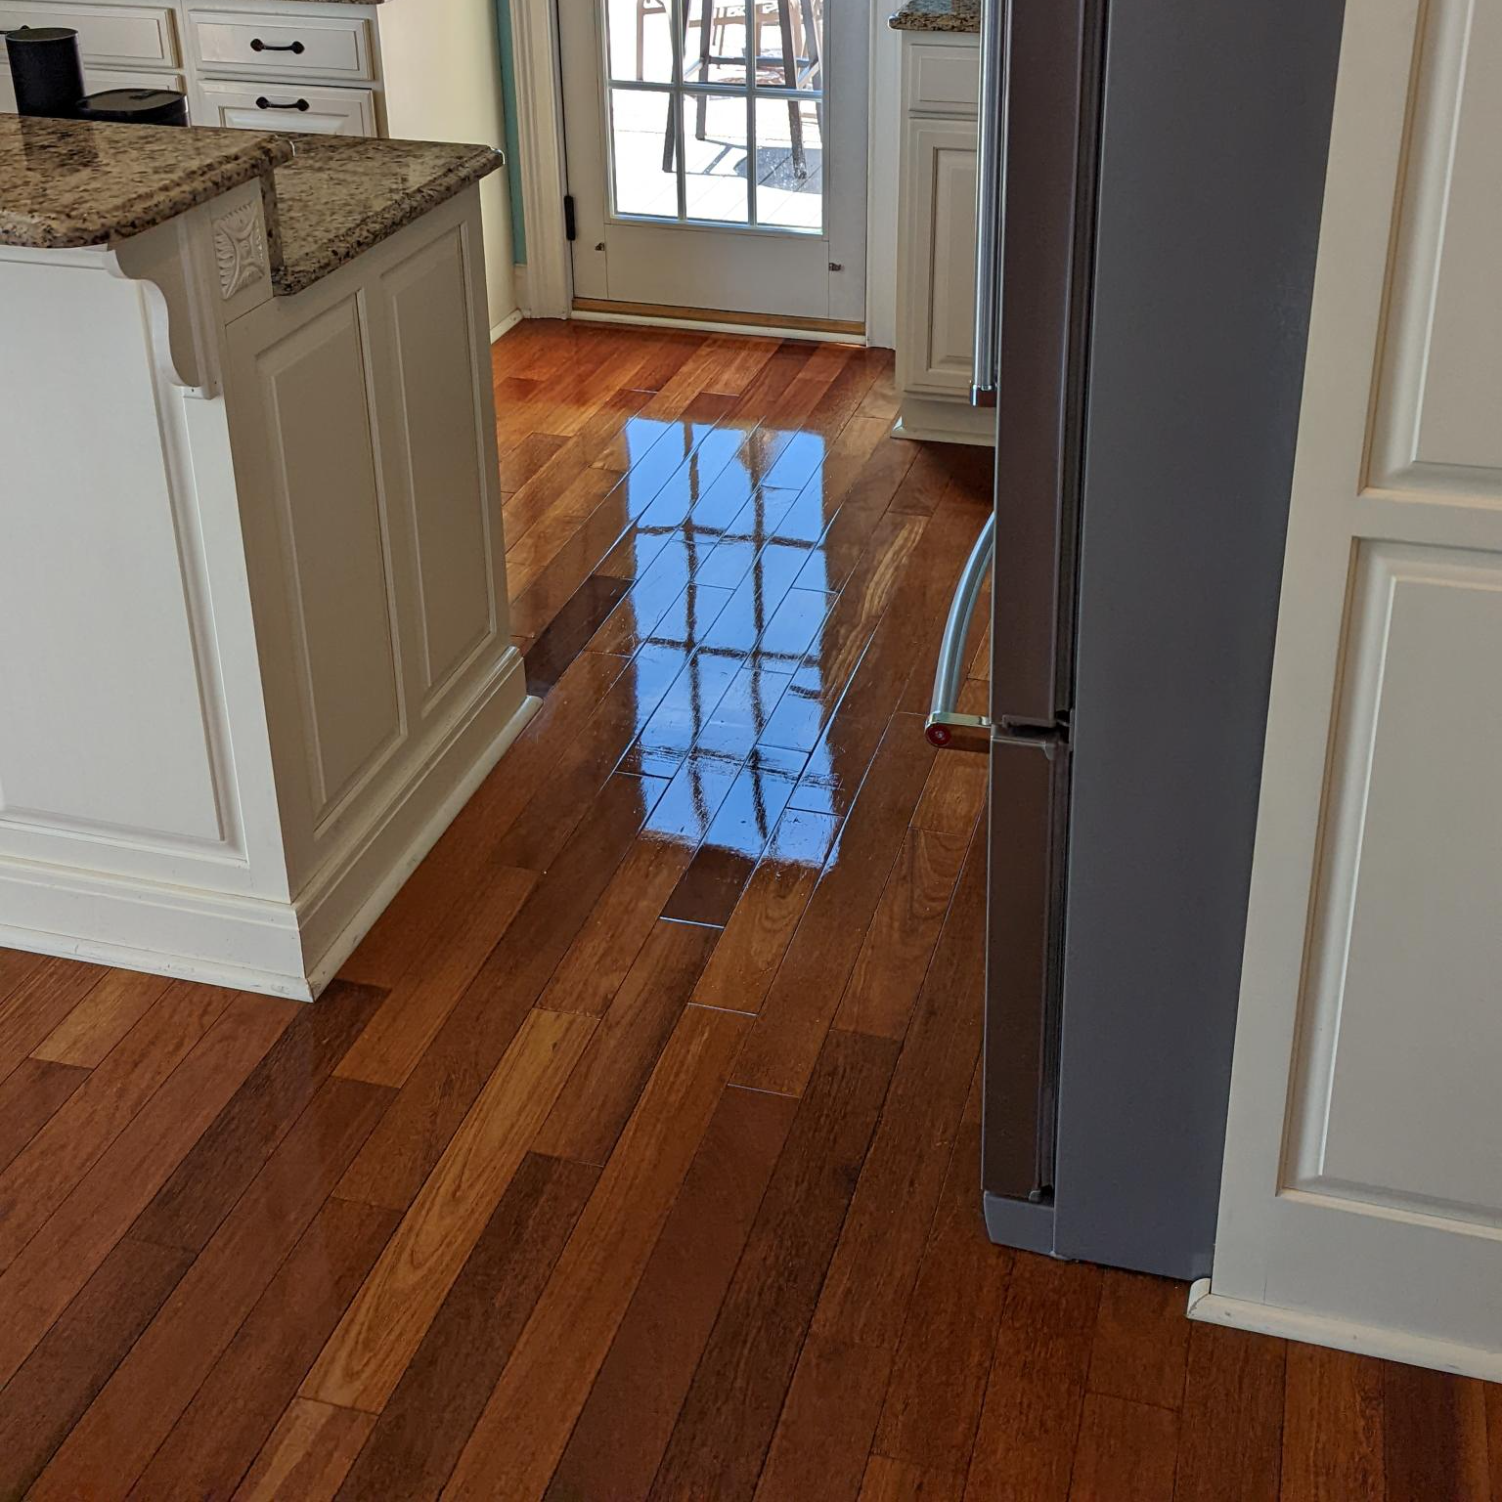 Shiny hardwood floor that isn't slippery in a kitchen after being professionally cleaned by Zerorez®